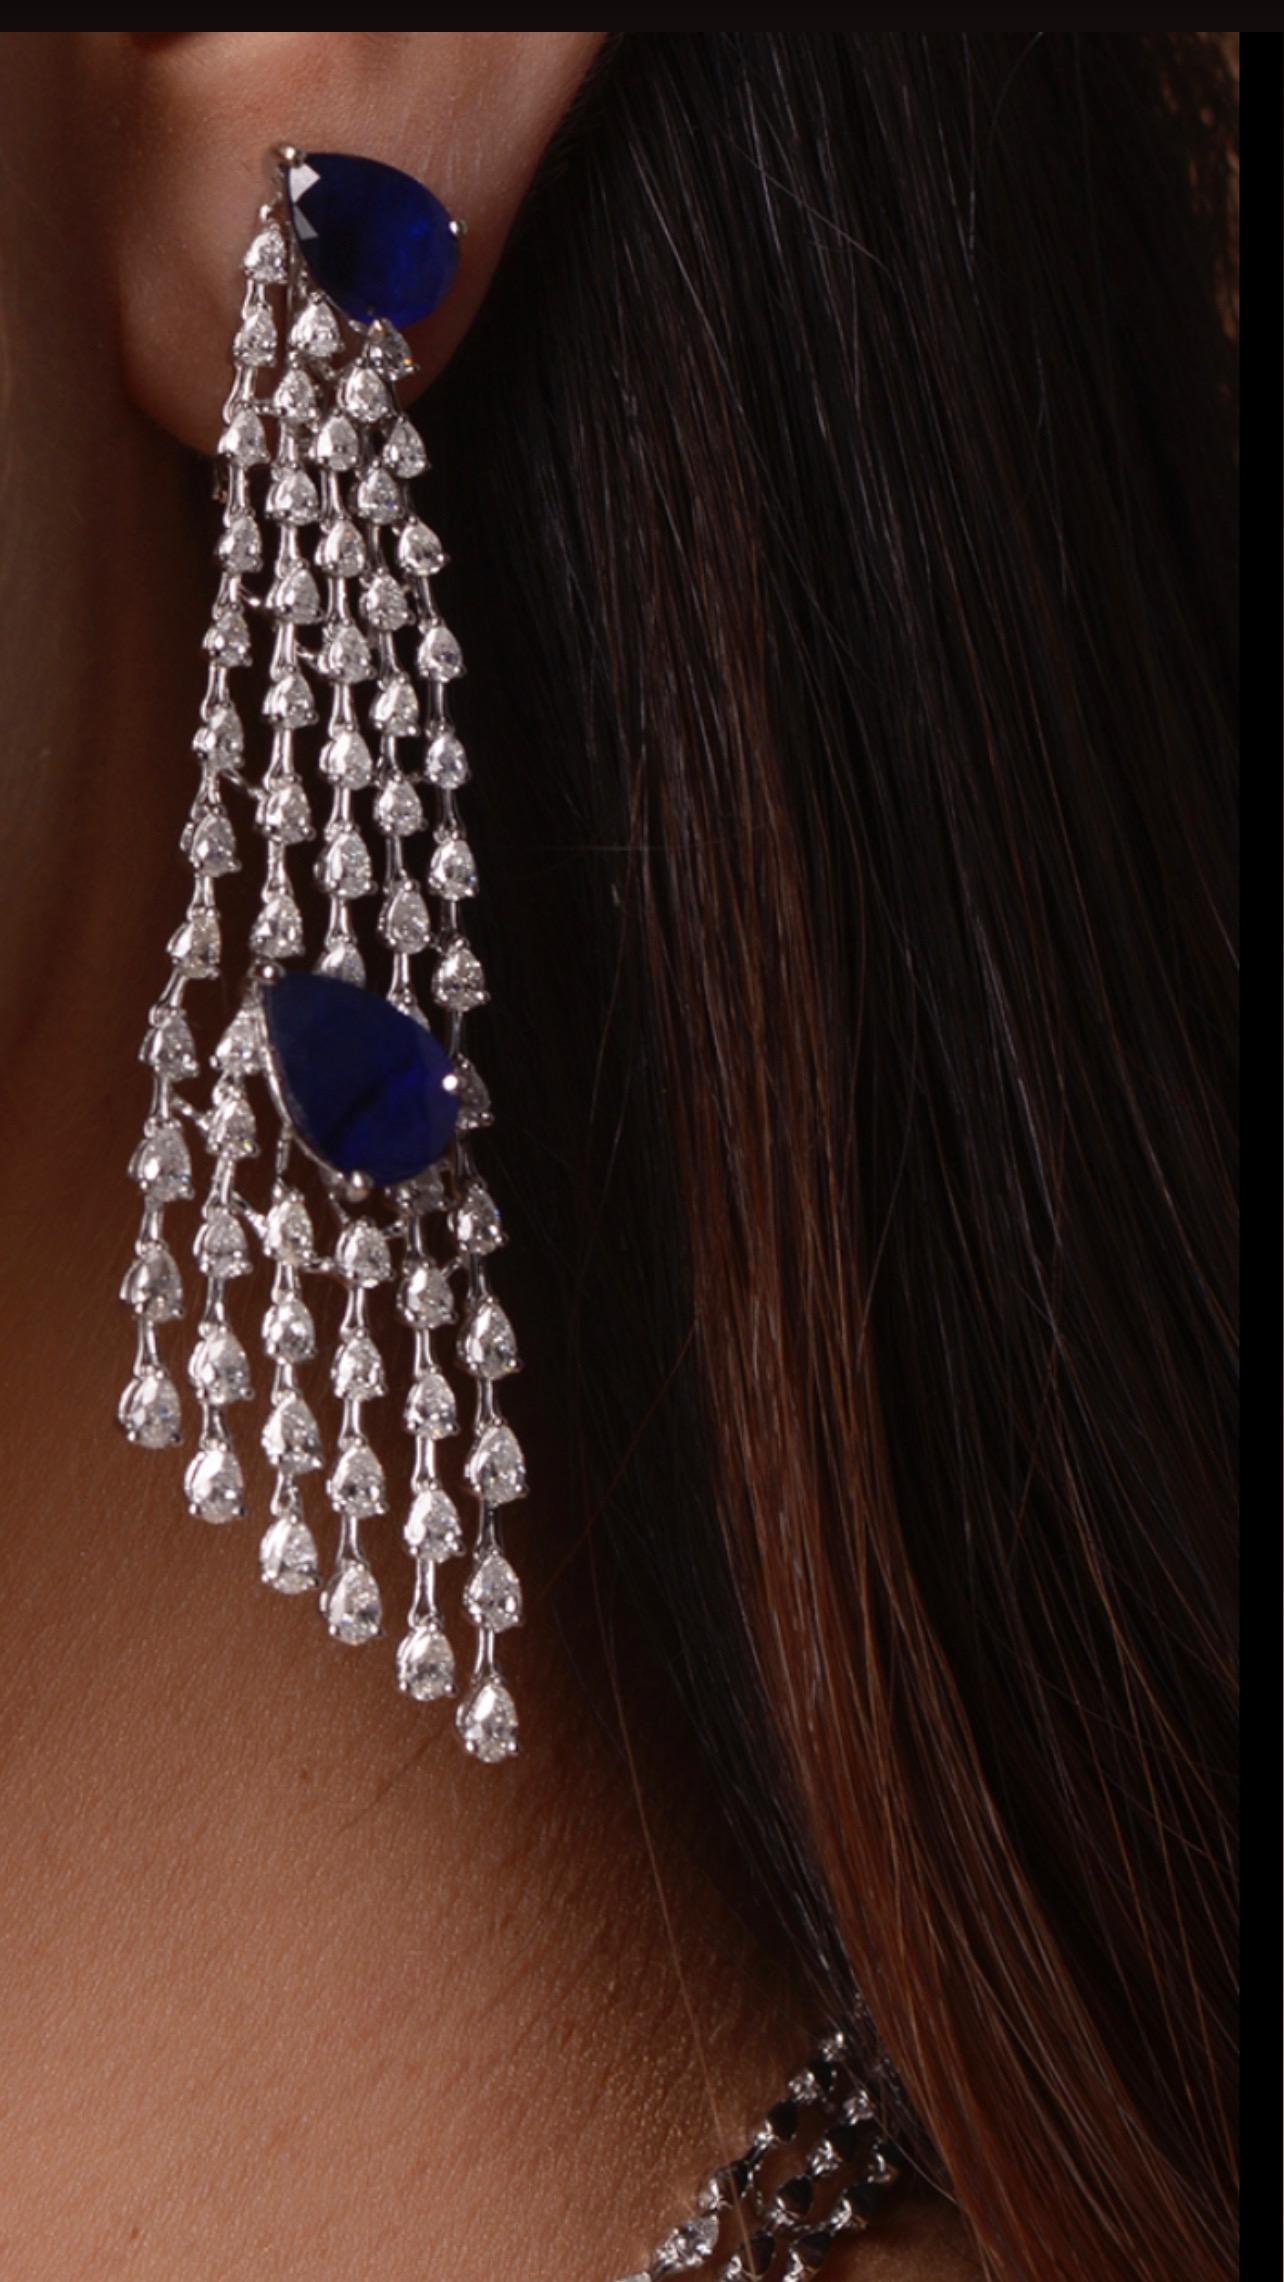 Our  spectacular 18K blue sapphire and diamonds Earrings.
Total diamond weight - 6.59 carats 
Total sapphire weight - 13.3 carats